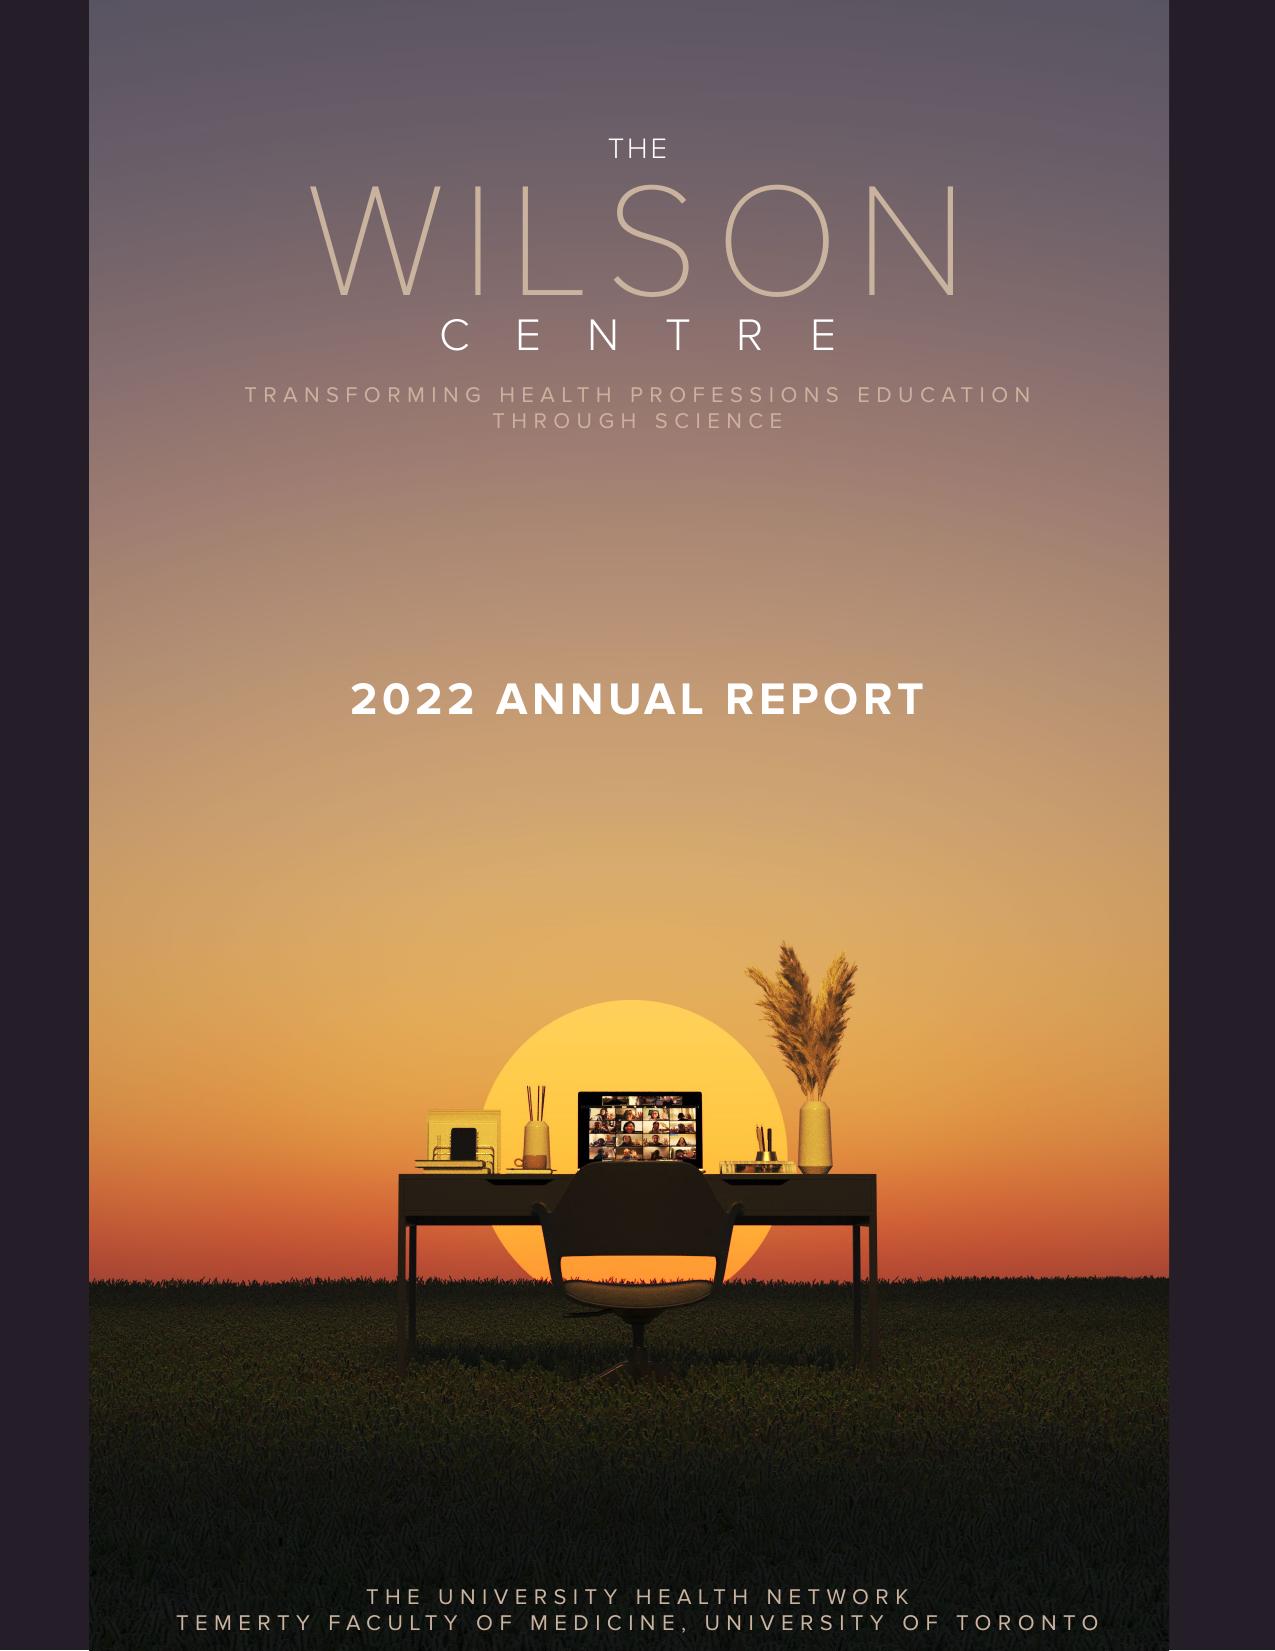 THEWILSONCENTRE 2022 Annual Report